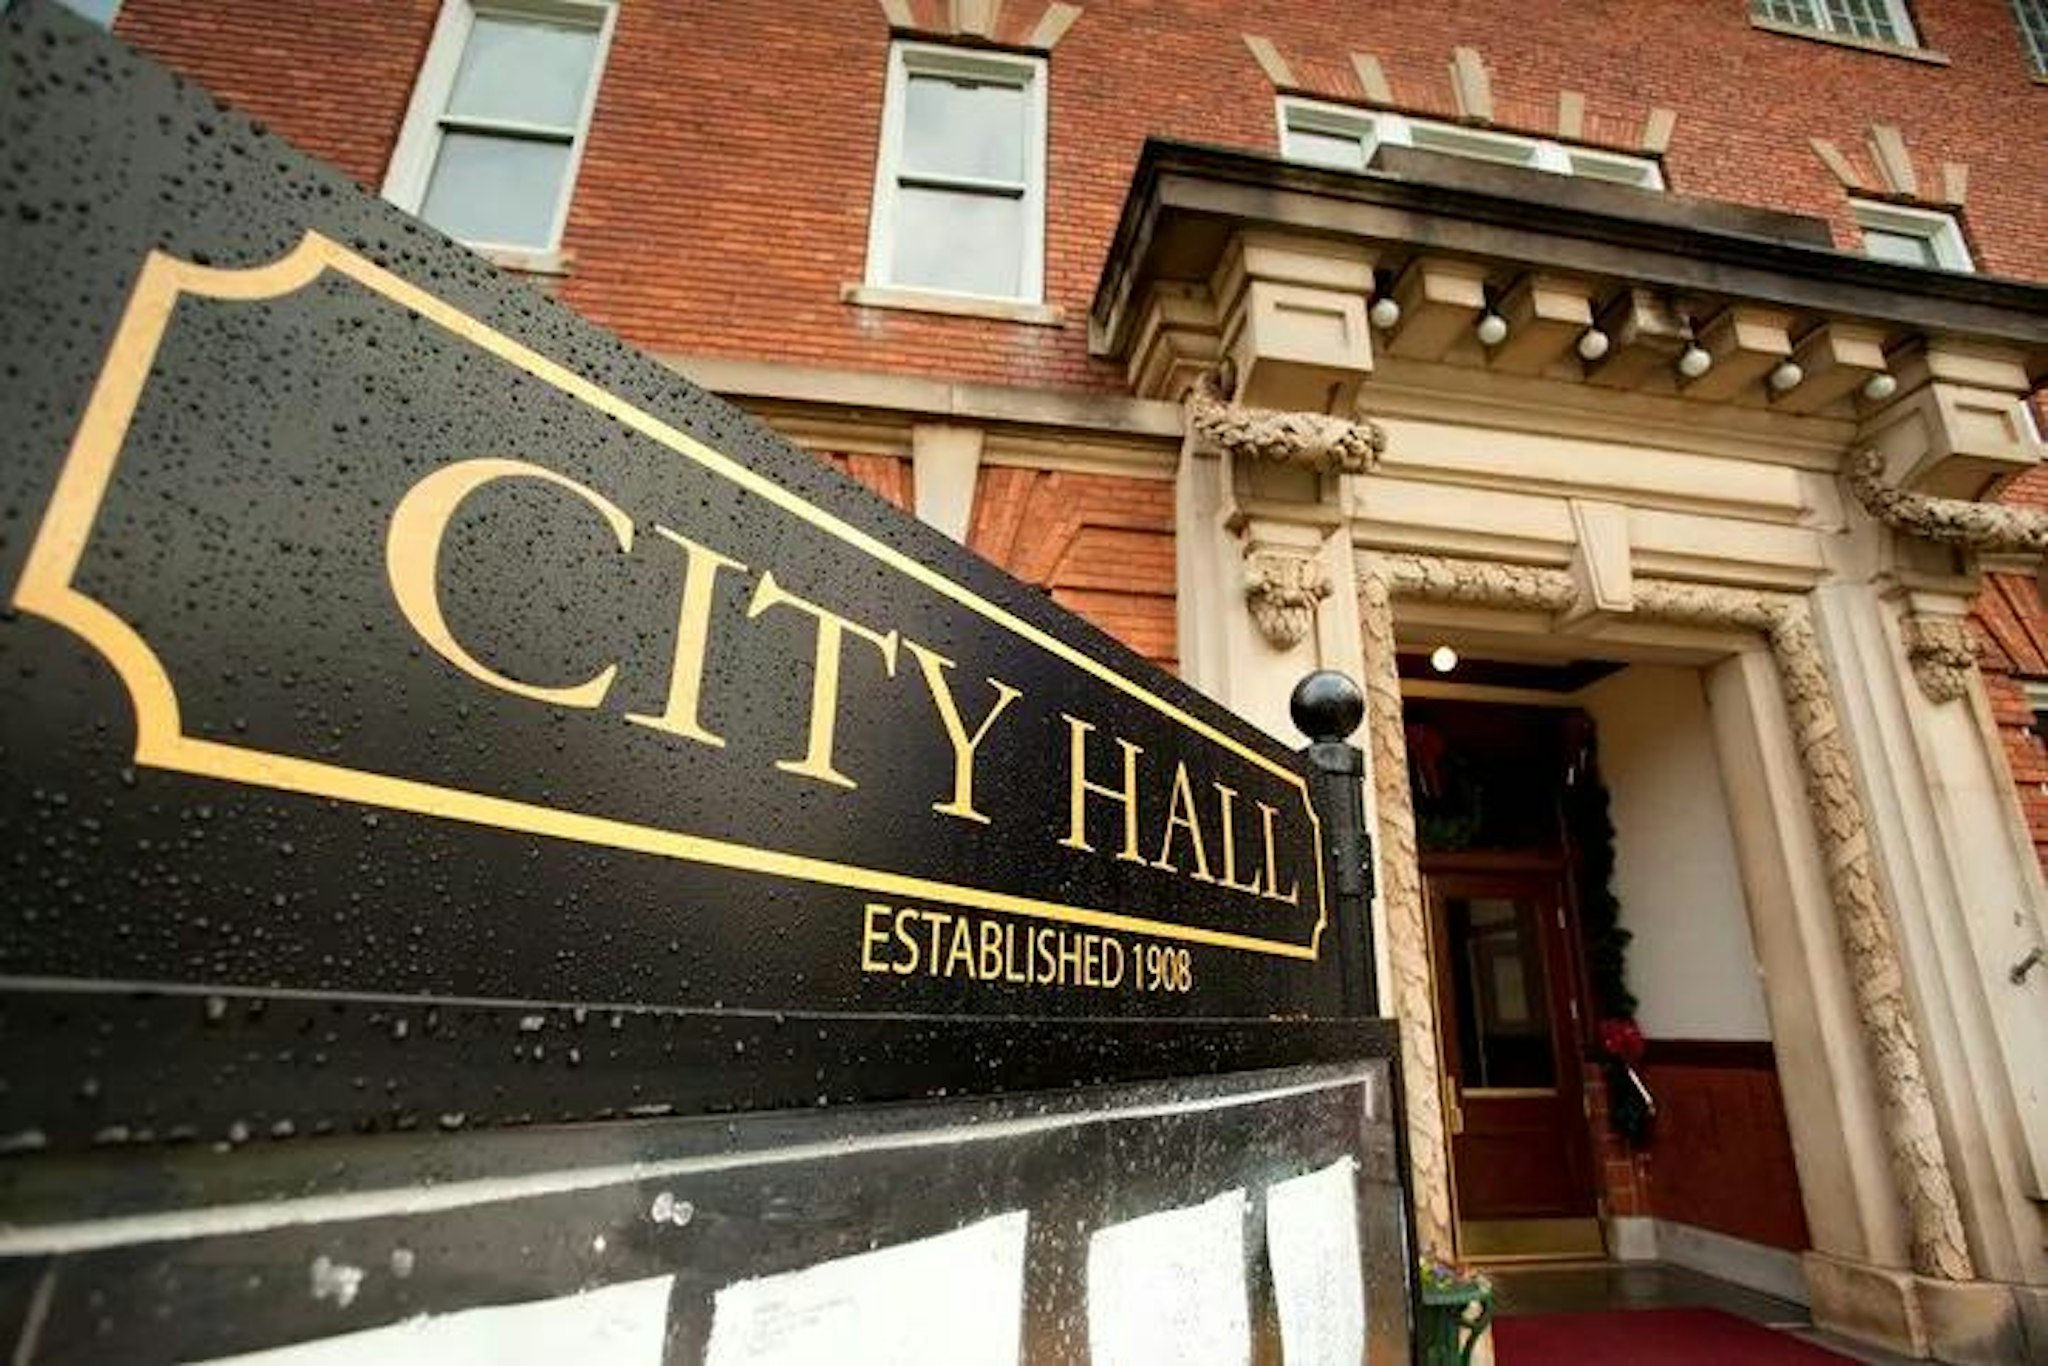 Building with sign outside reading "City hall, established 1908"